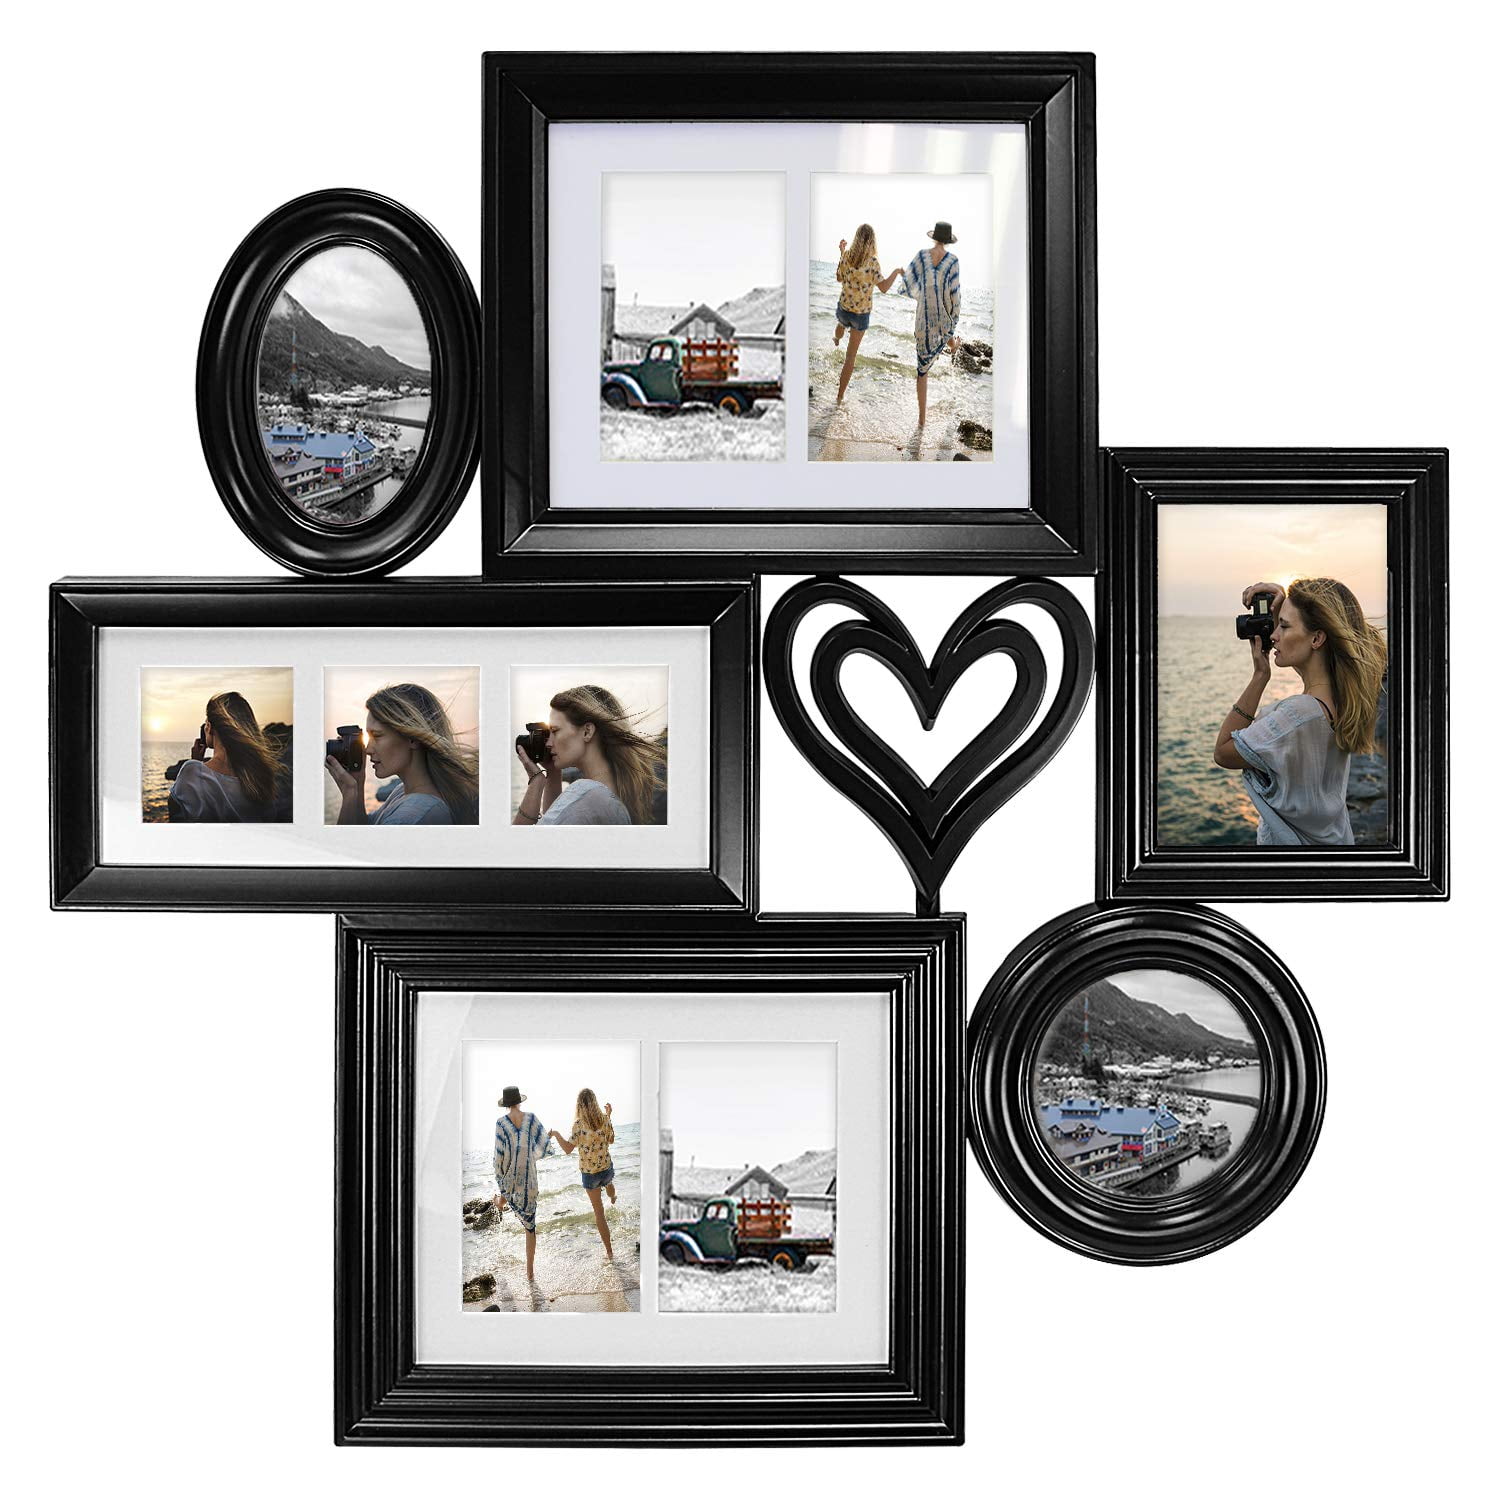 Magical Unicorn Shaped Multi Frame Picture Photo Frame ~ Design Varies 